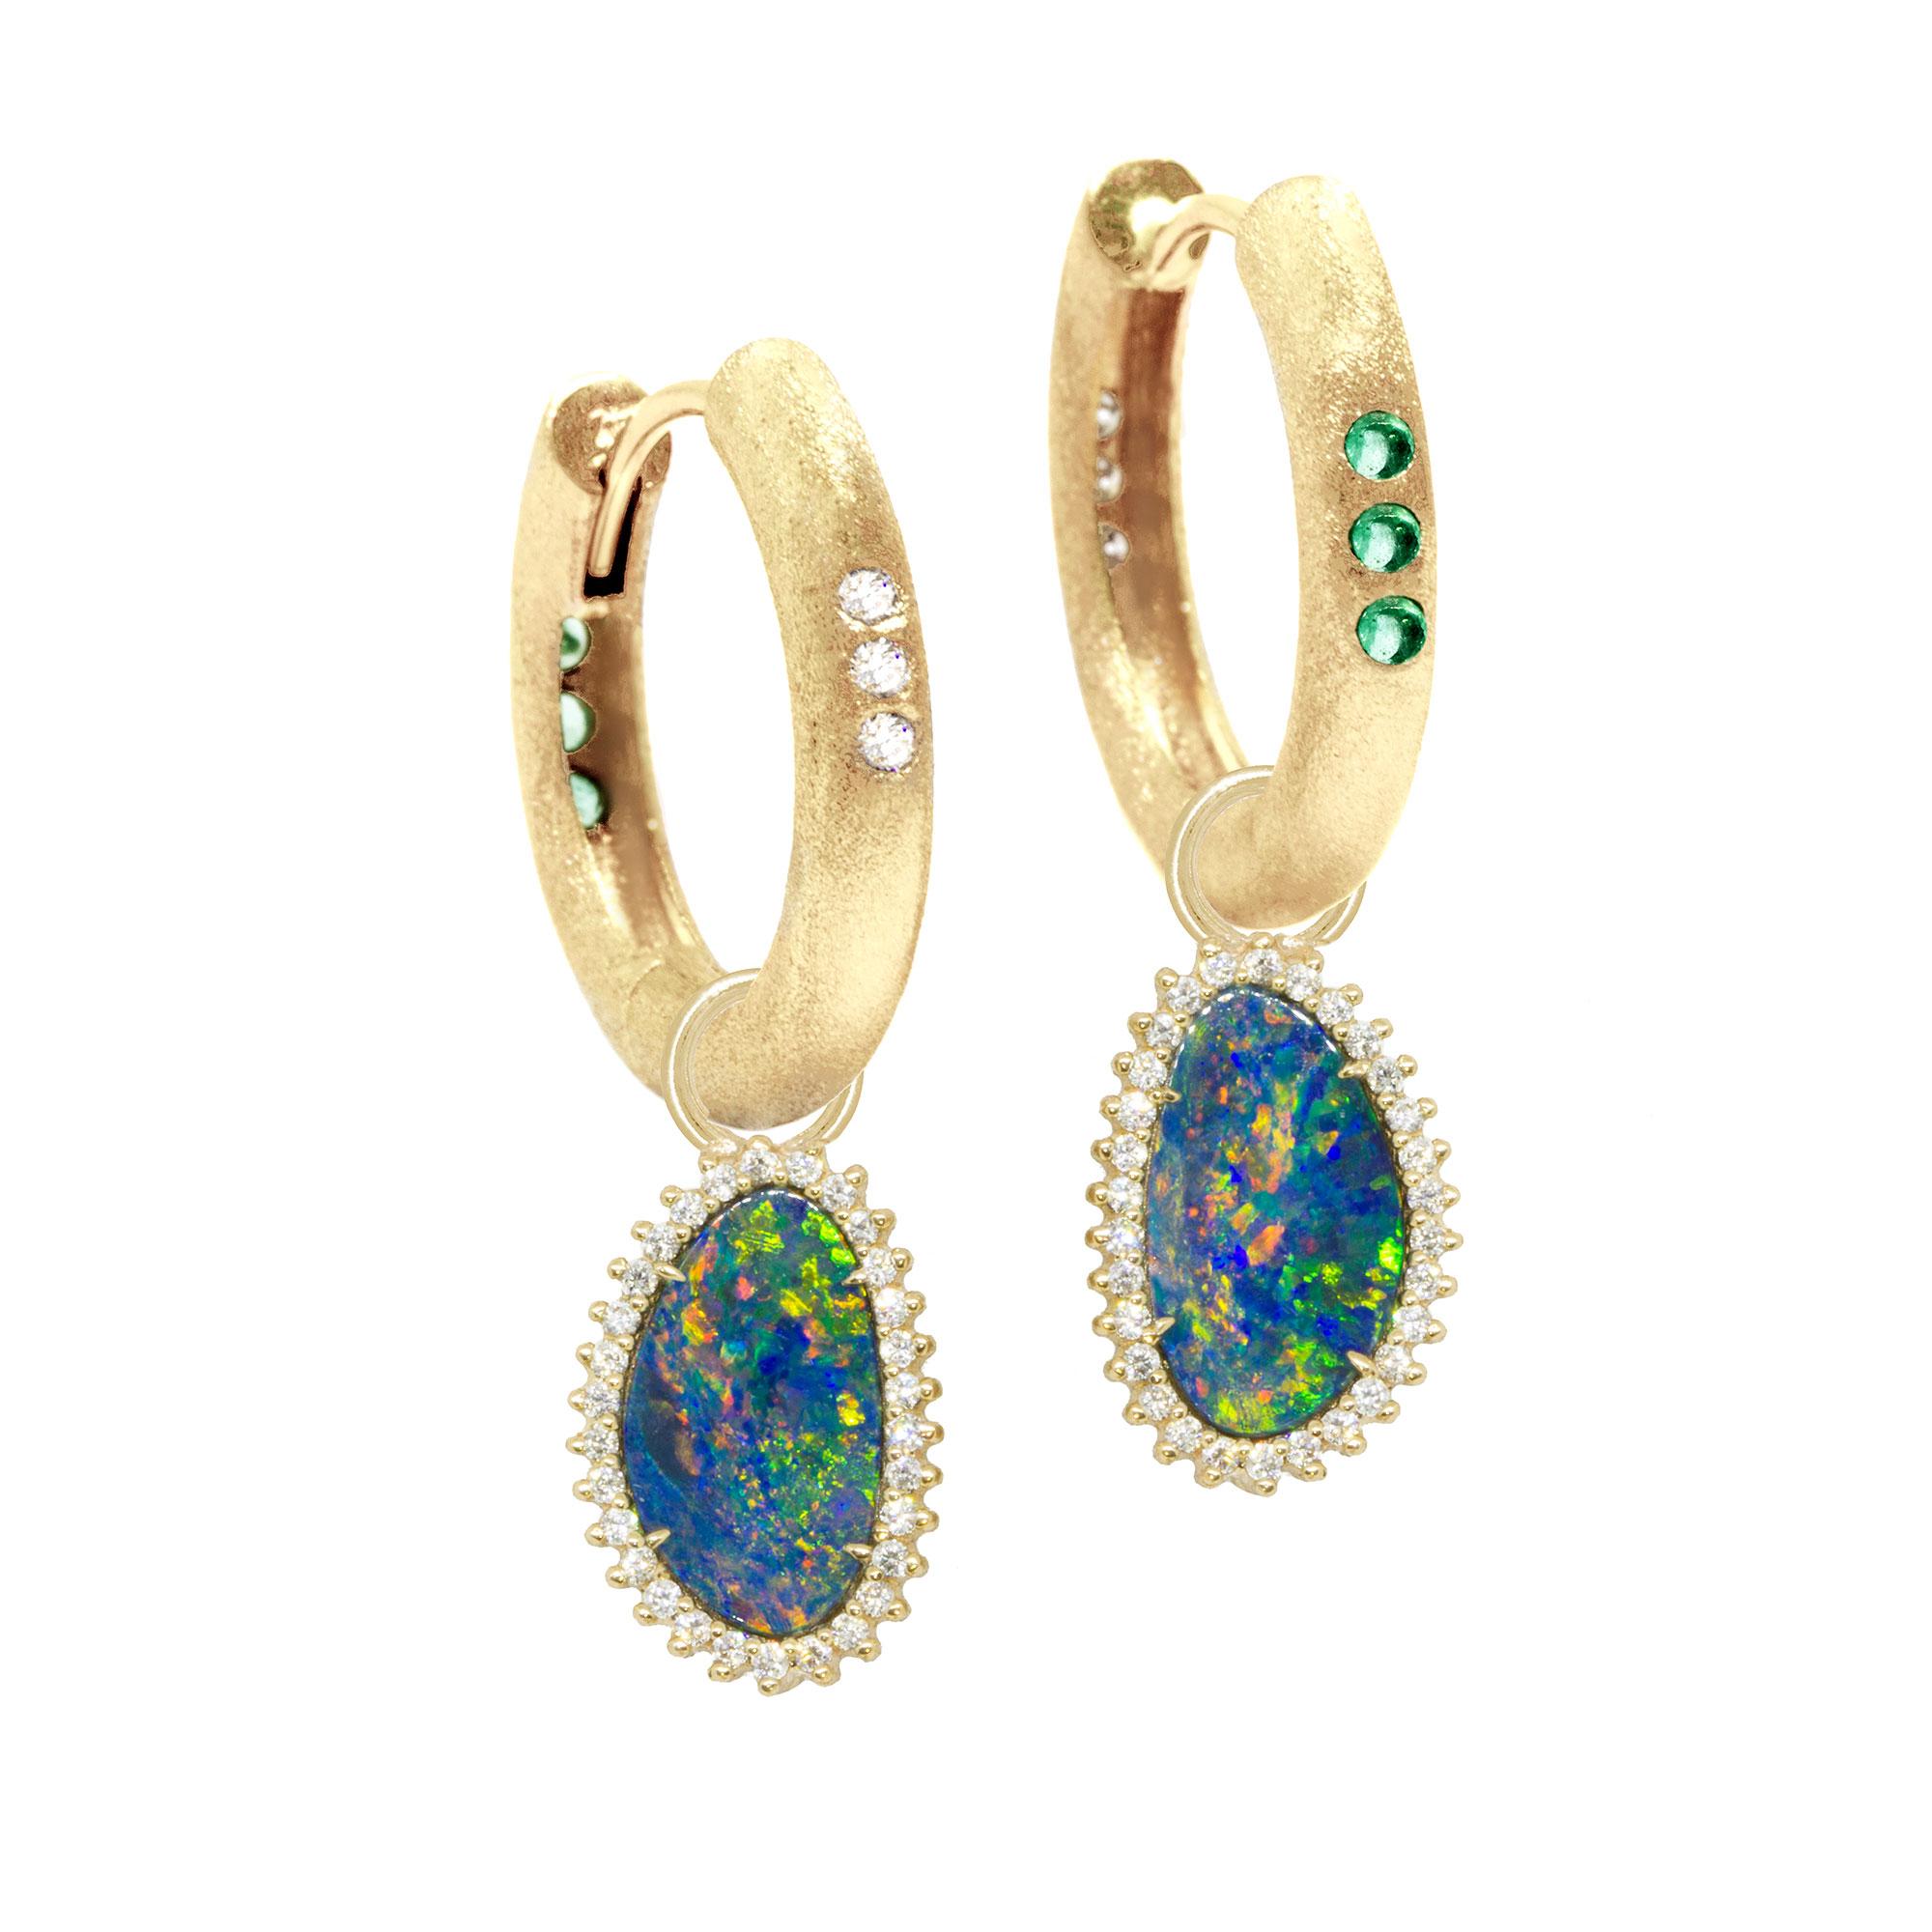 Earthy and unique, our one-of-a-kind Opal Earring Charms adorned with diamonds is a true delight. The intricate and detailed charms change up your style instantly, by giving you a bohemian chic vibe. Pair them with another charm (or a few) and